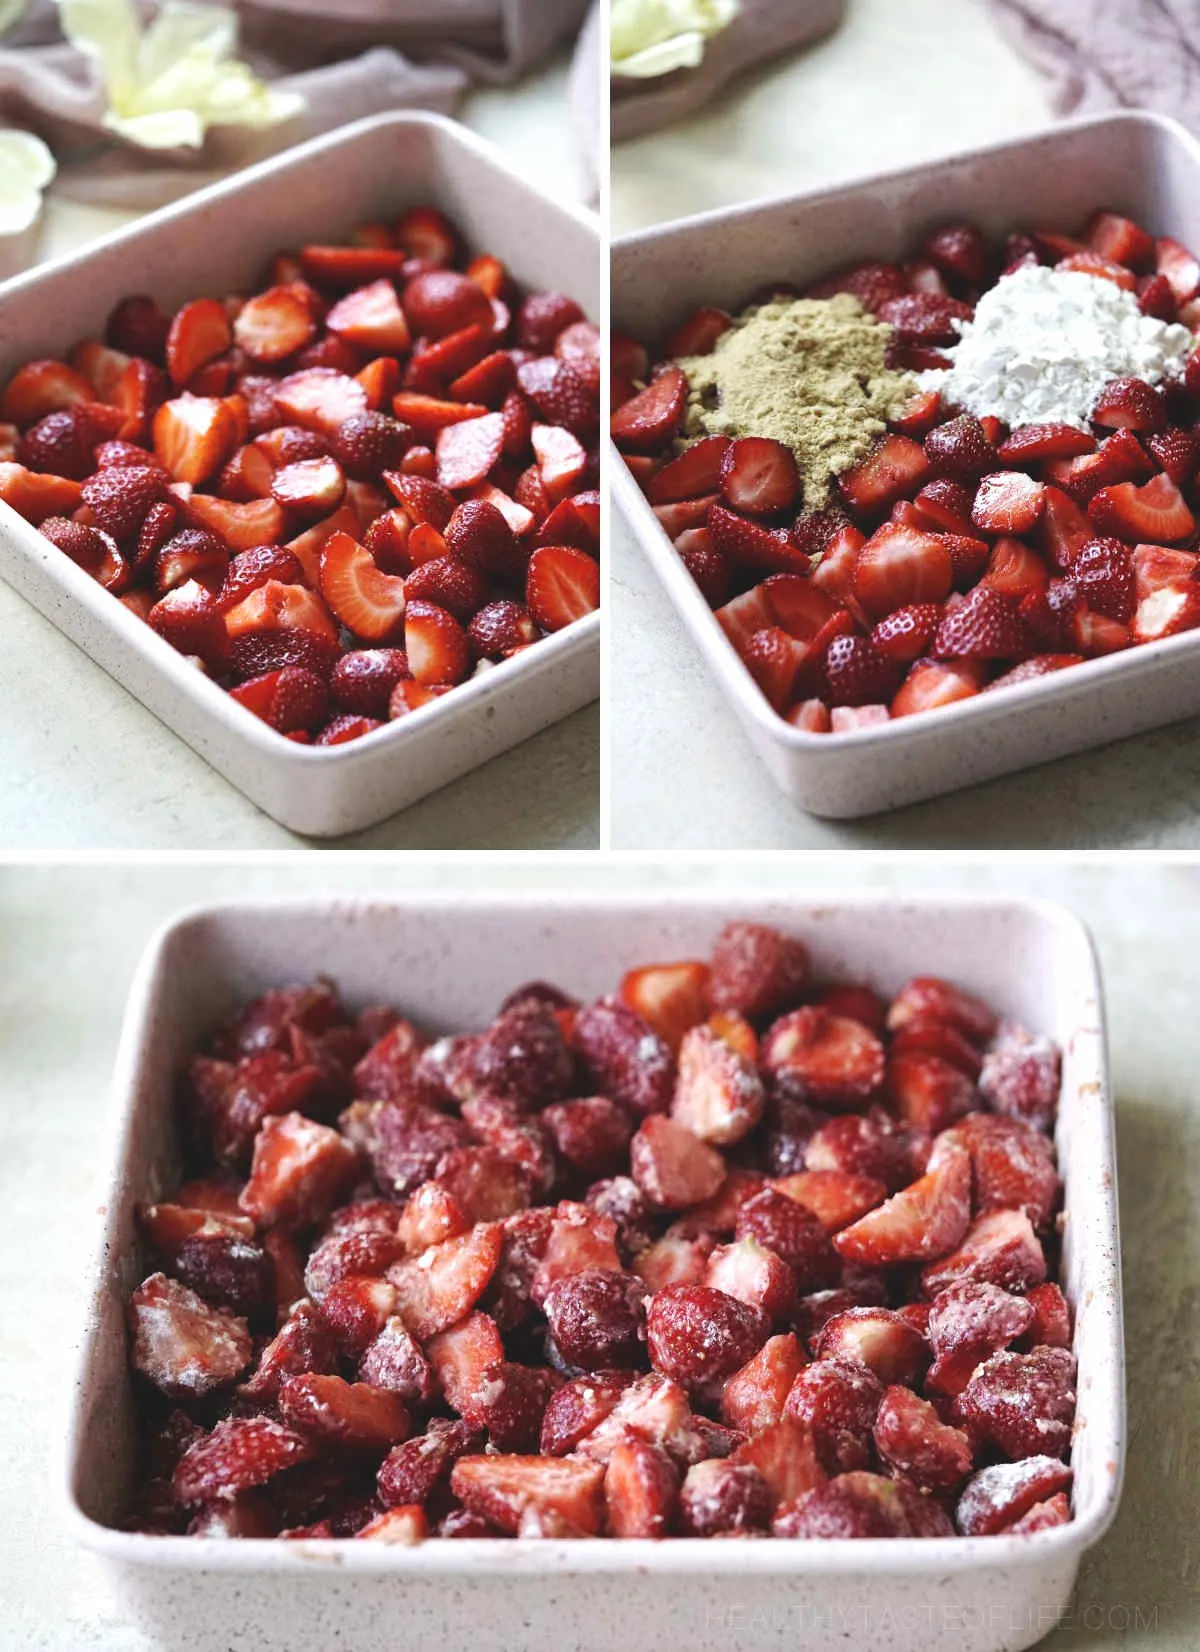 Process images showing how to make strawberry filling with fresh strawberries for this strawberry crumble recipe.